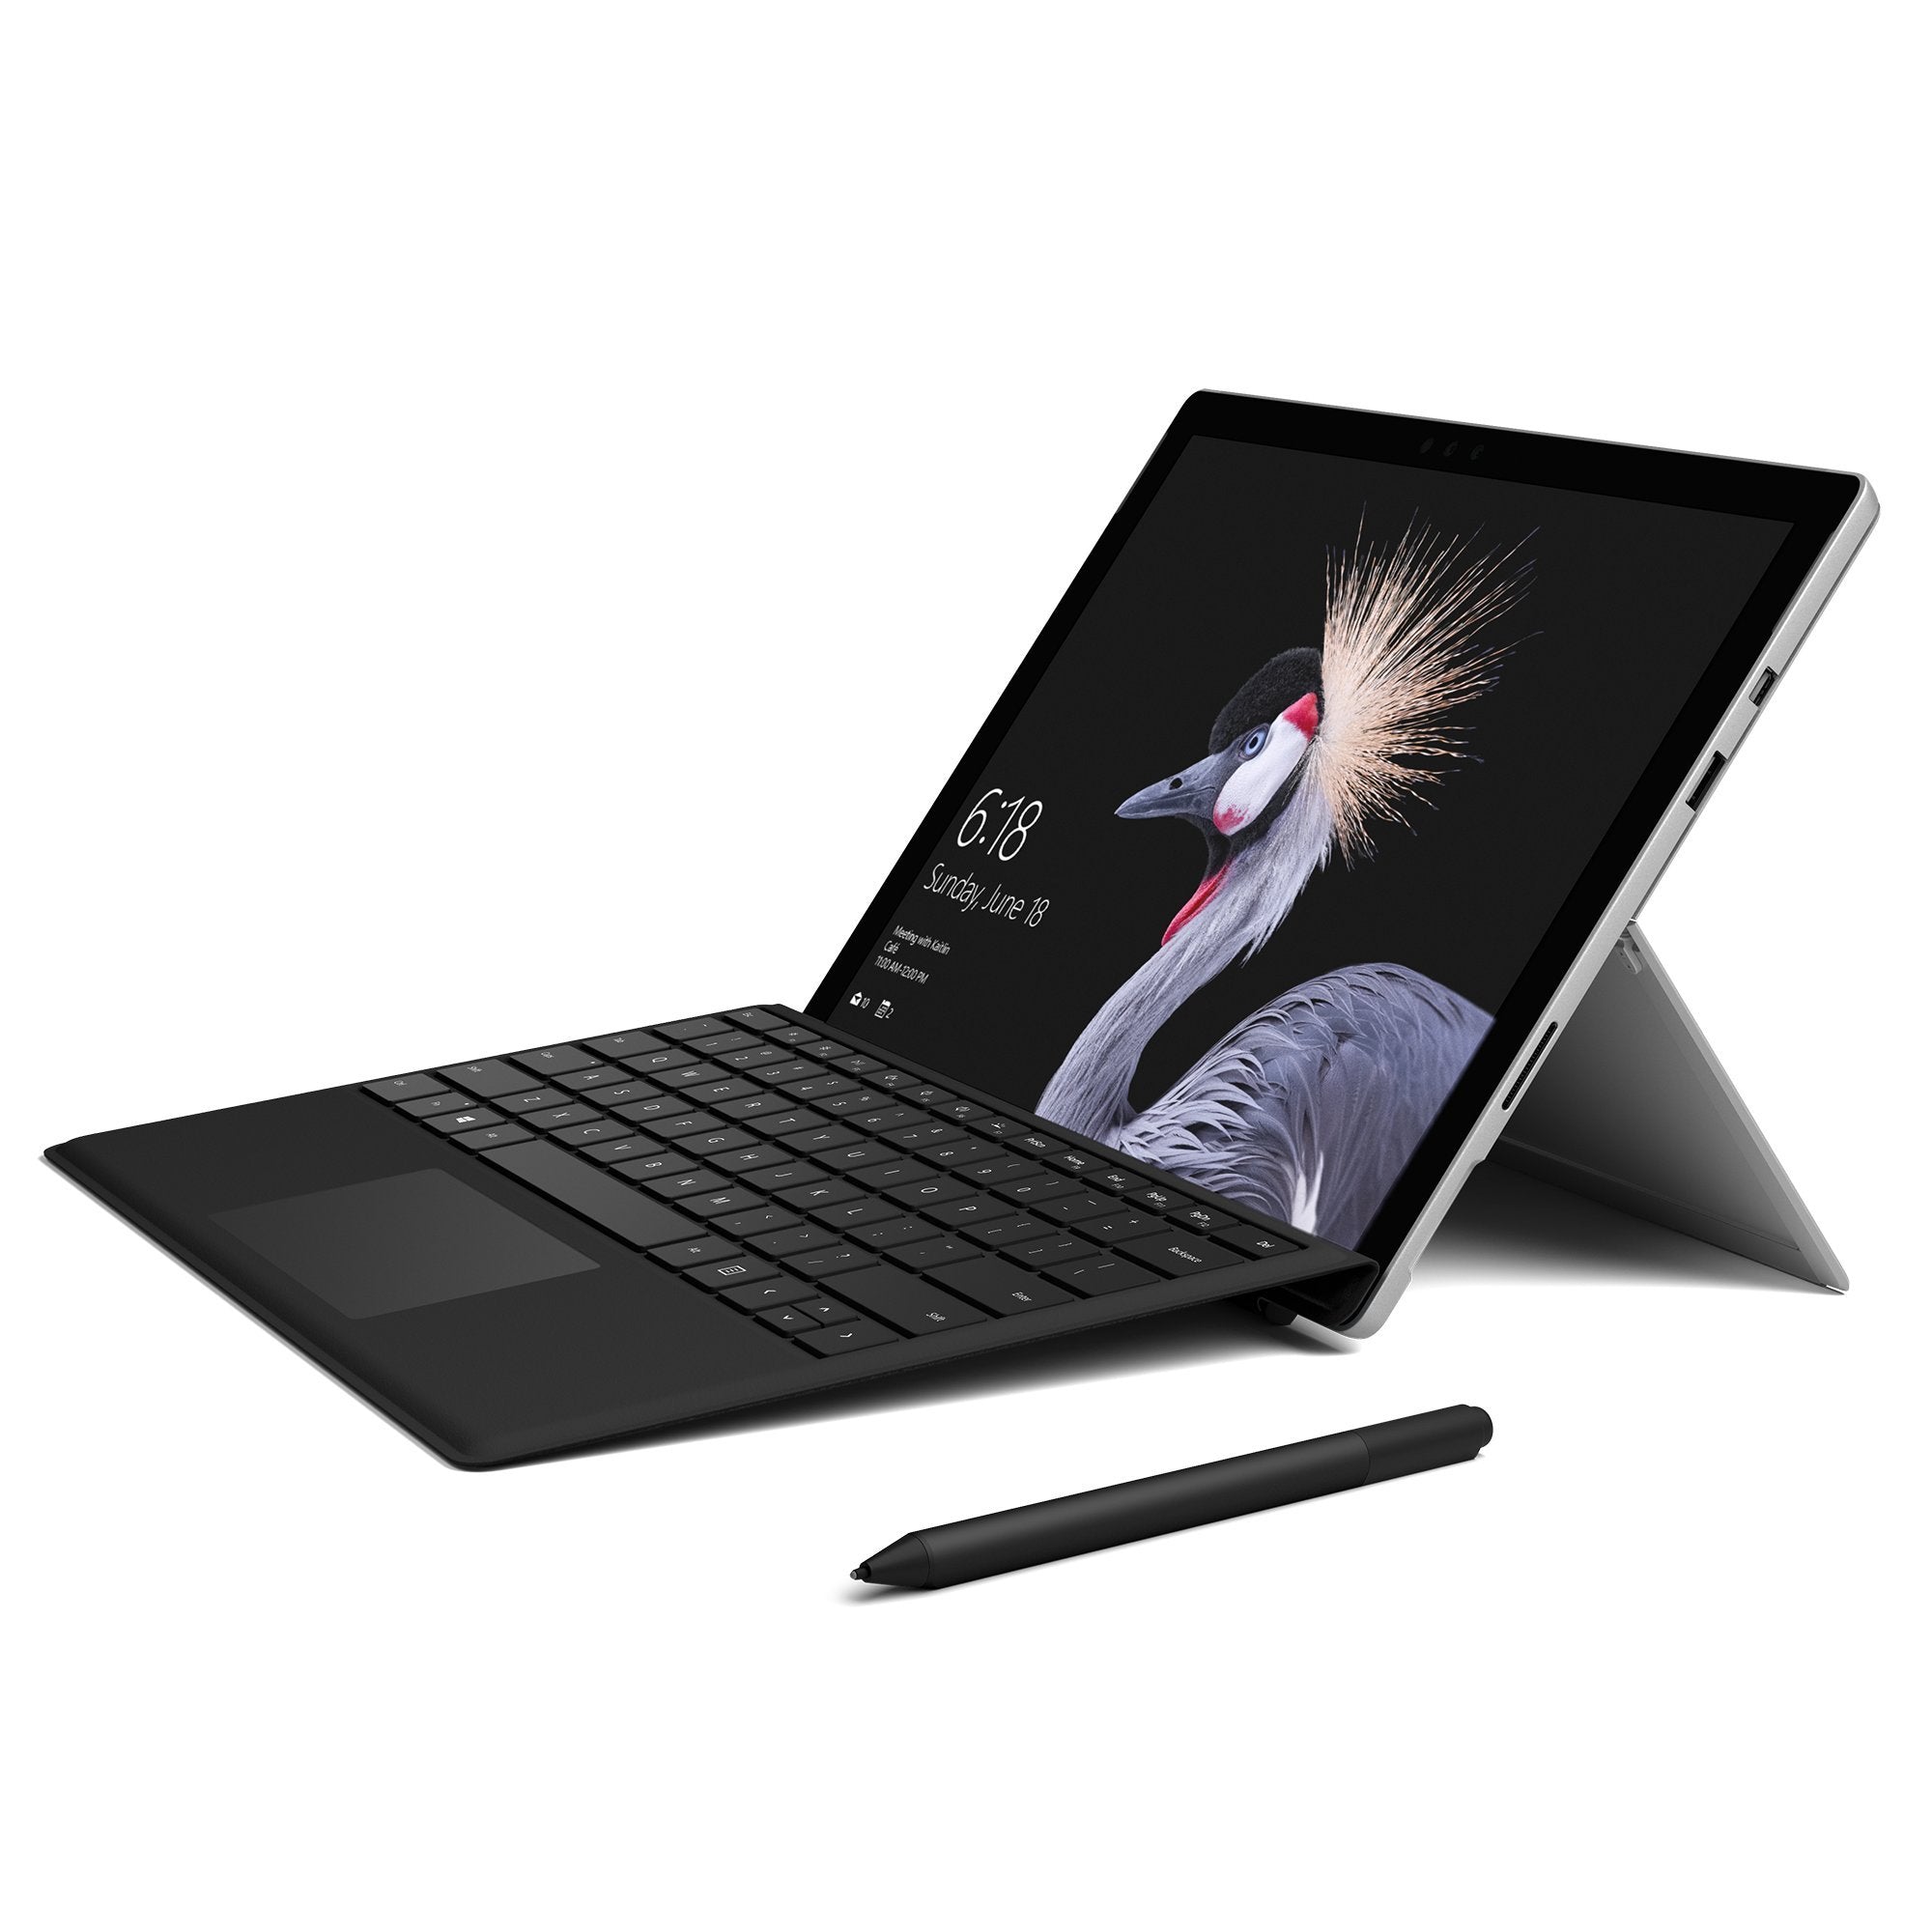 Microsoft Type Cover for Surface Pro - Black  (FMM-00001)